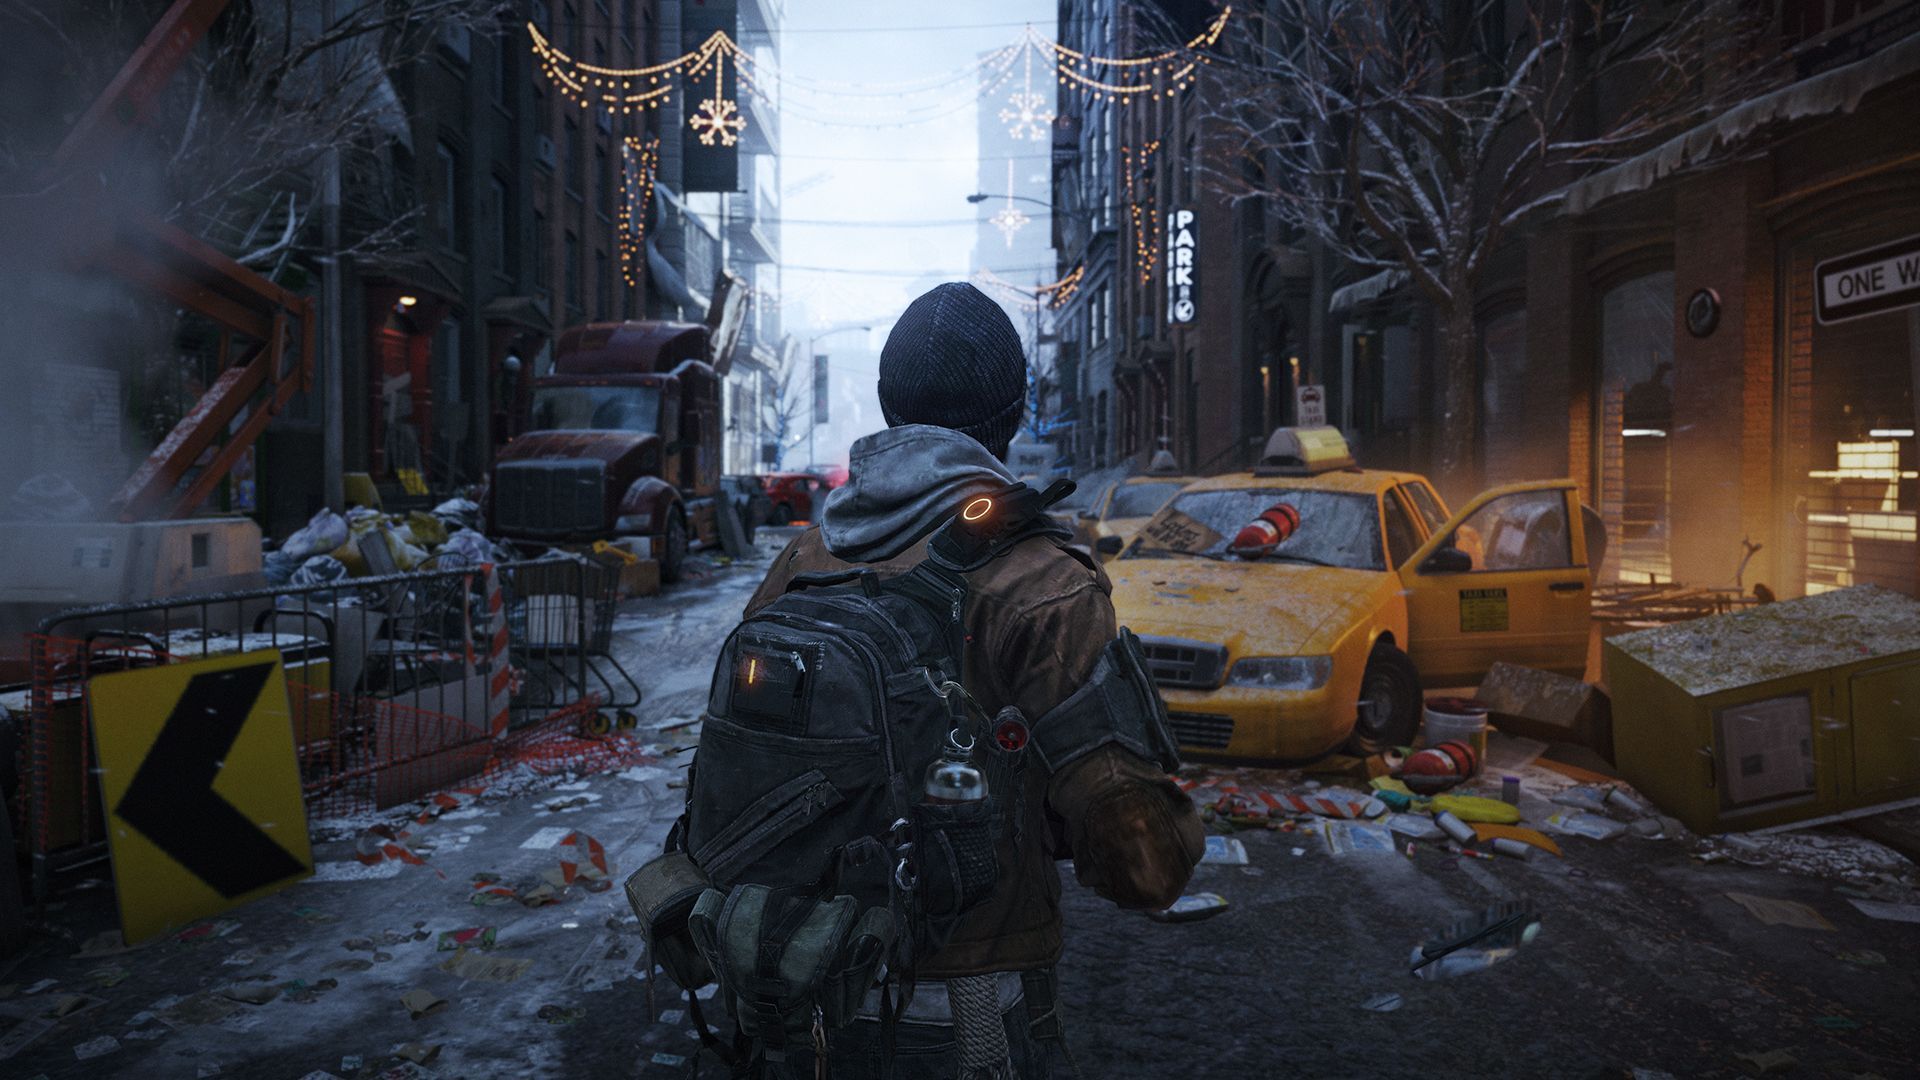 Tom Clancys The division walking the city streets wallpapers and other